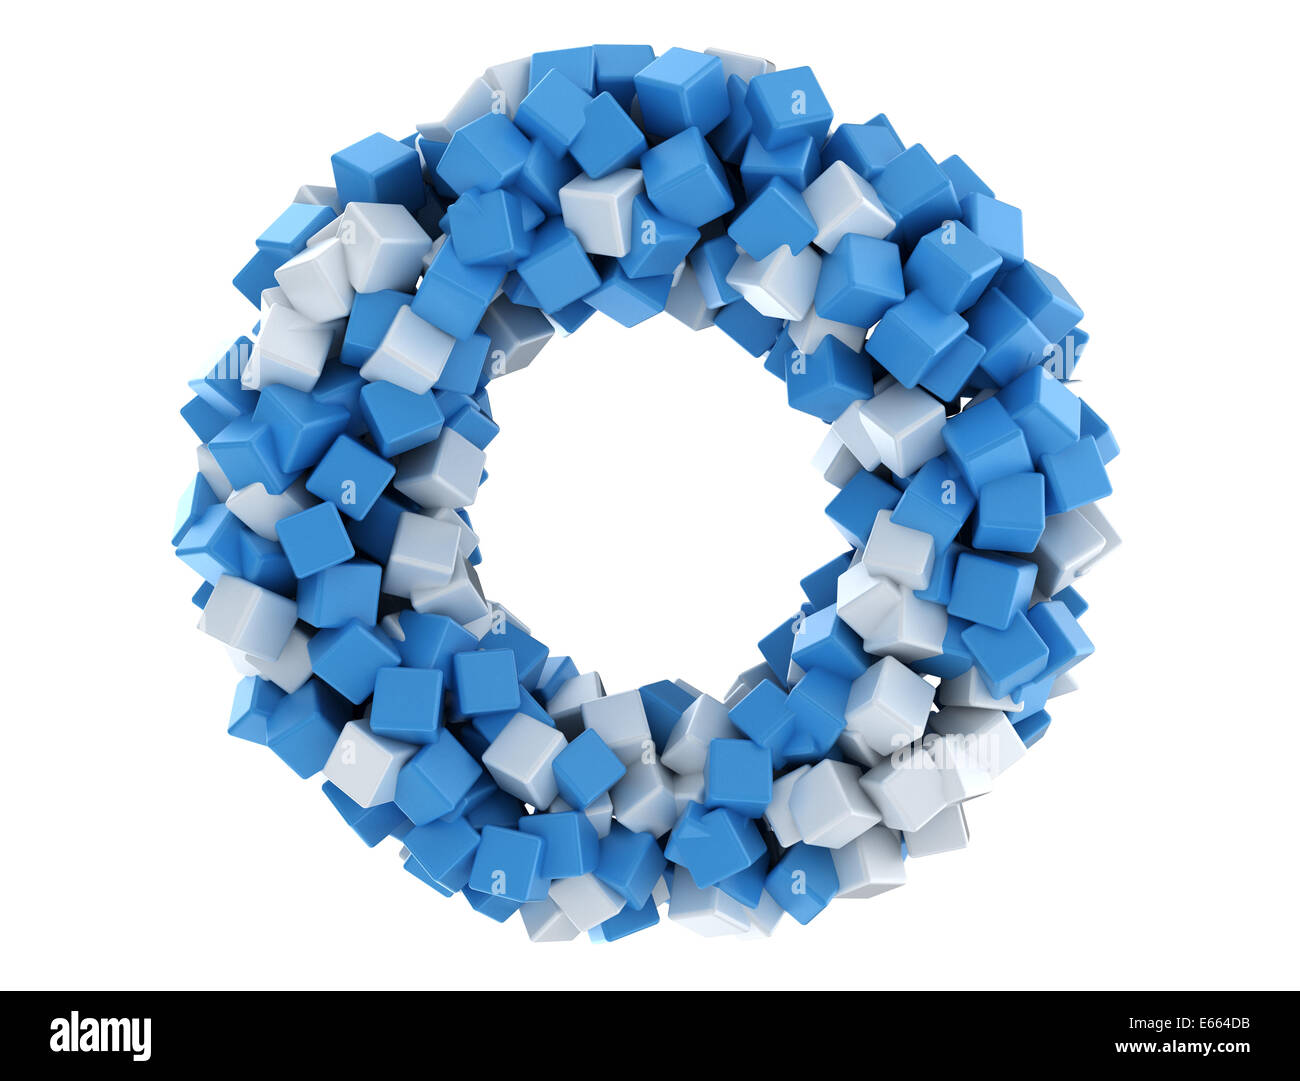 Abstract circle created with blue and white 3d cubes Stock Photo